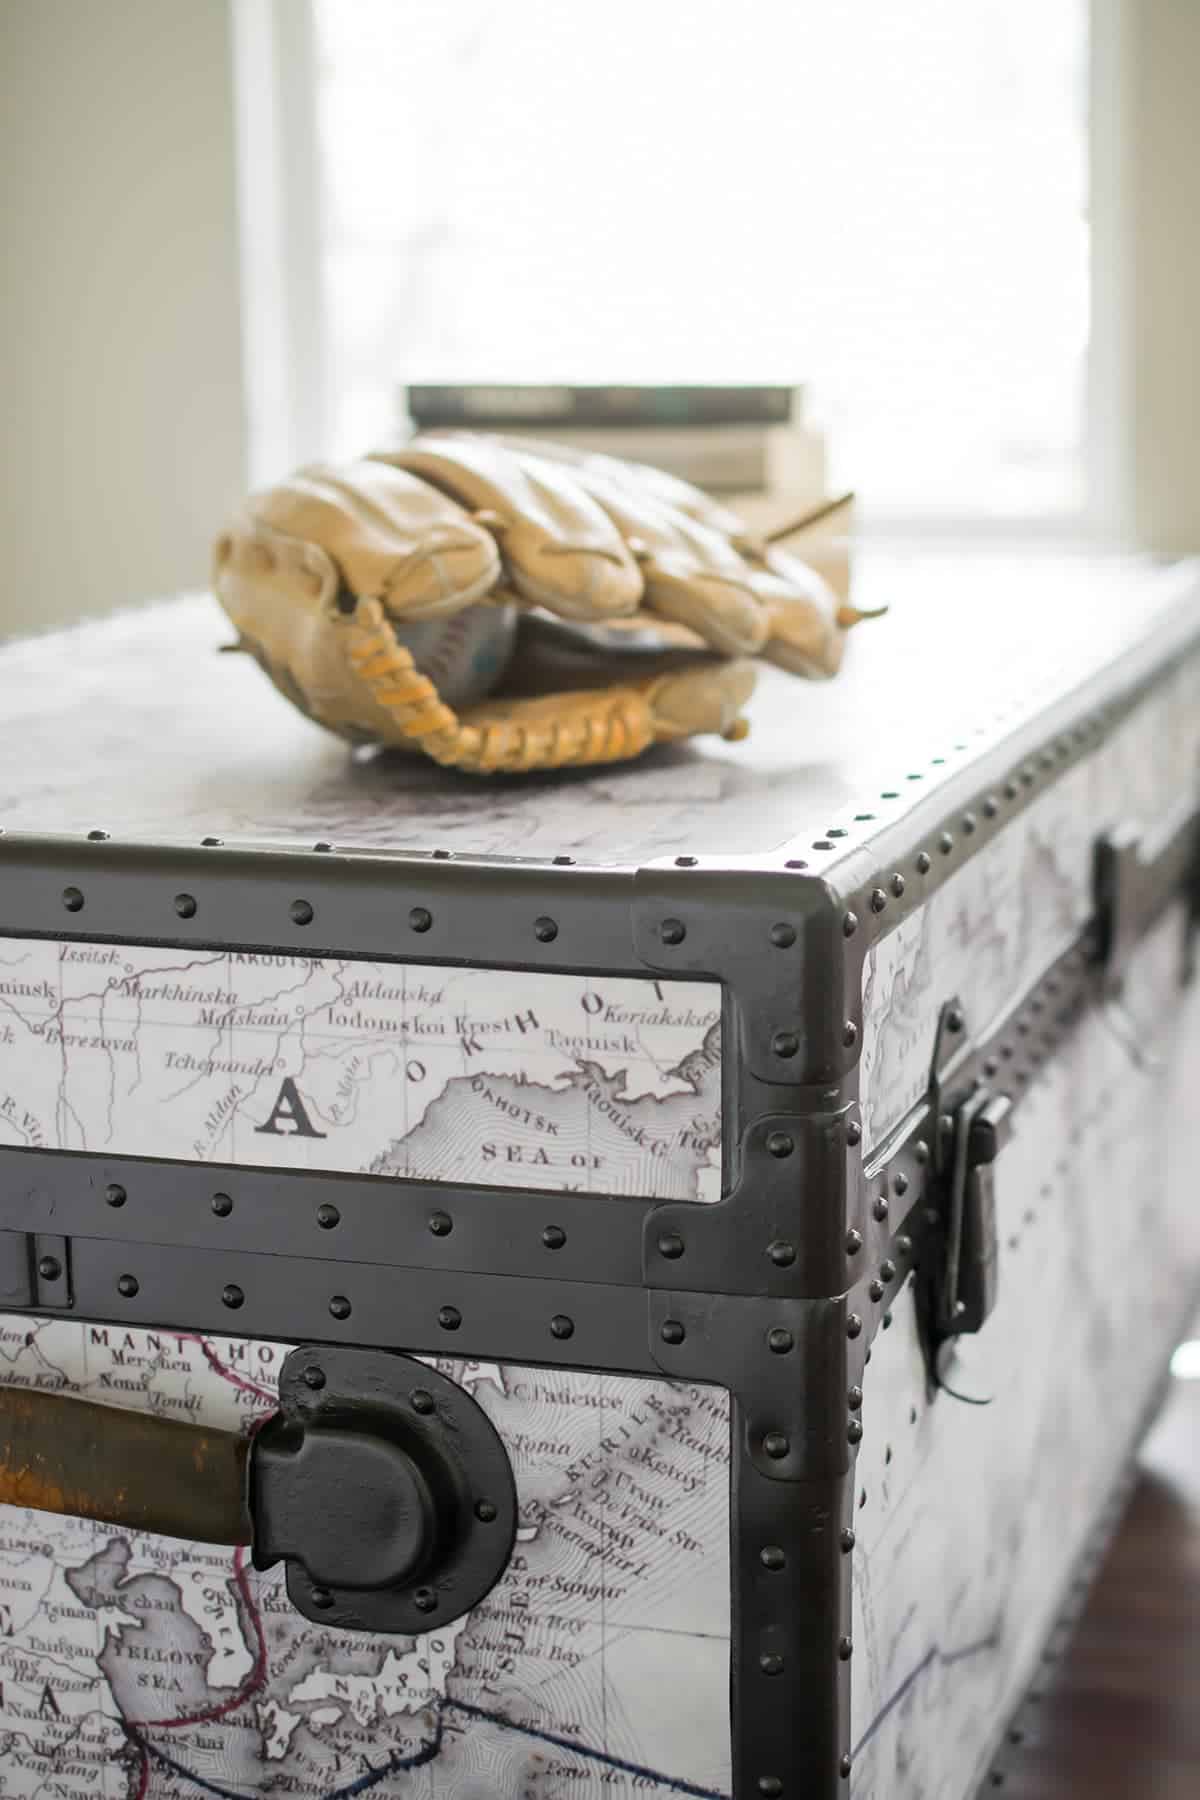 Antique steamer trunk with black and white vintage map covering it and a baseball mitt placed on top .